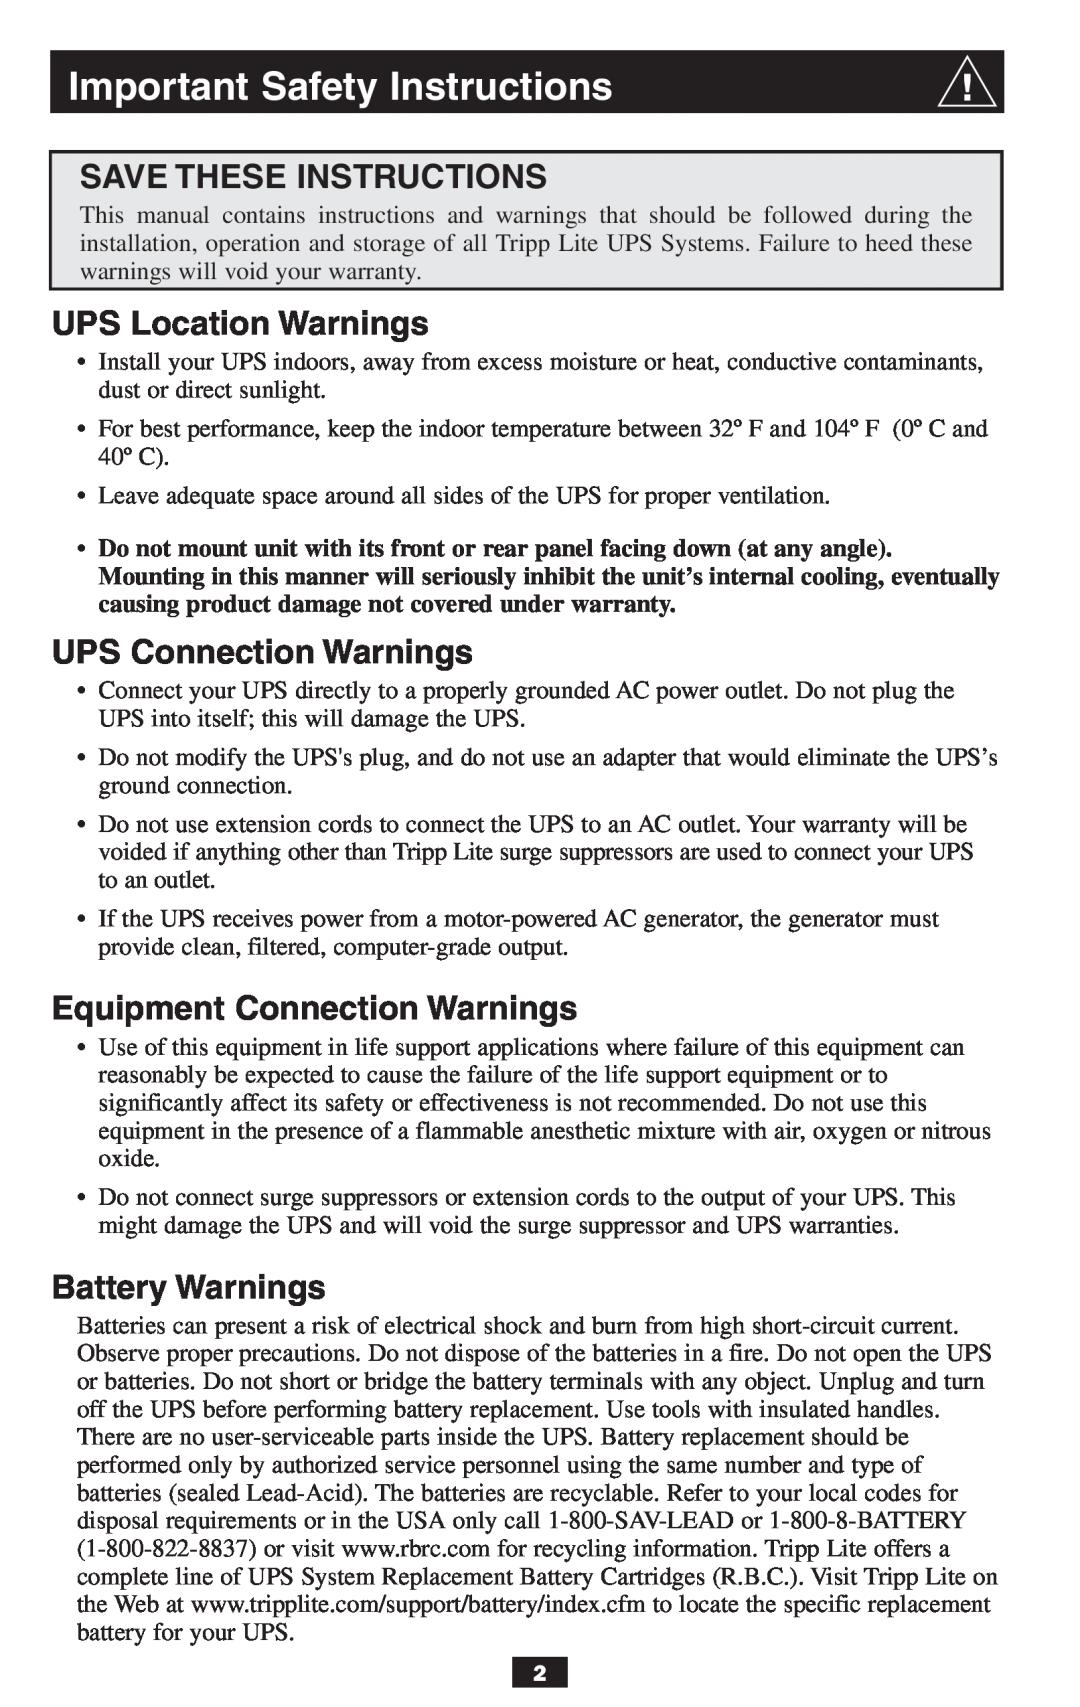 Tripp Lite 2-9USTAND owner manual Save These Instructions, UPS Location Warnings, UPS Connection Warnings, Battery Warnings 